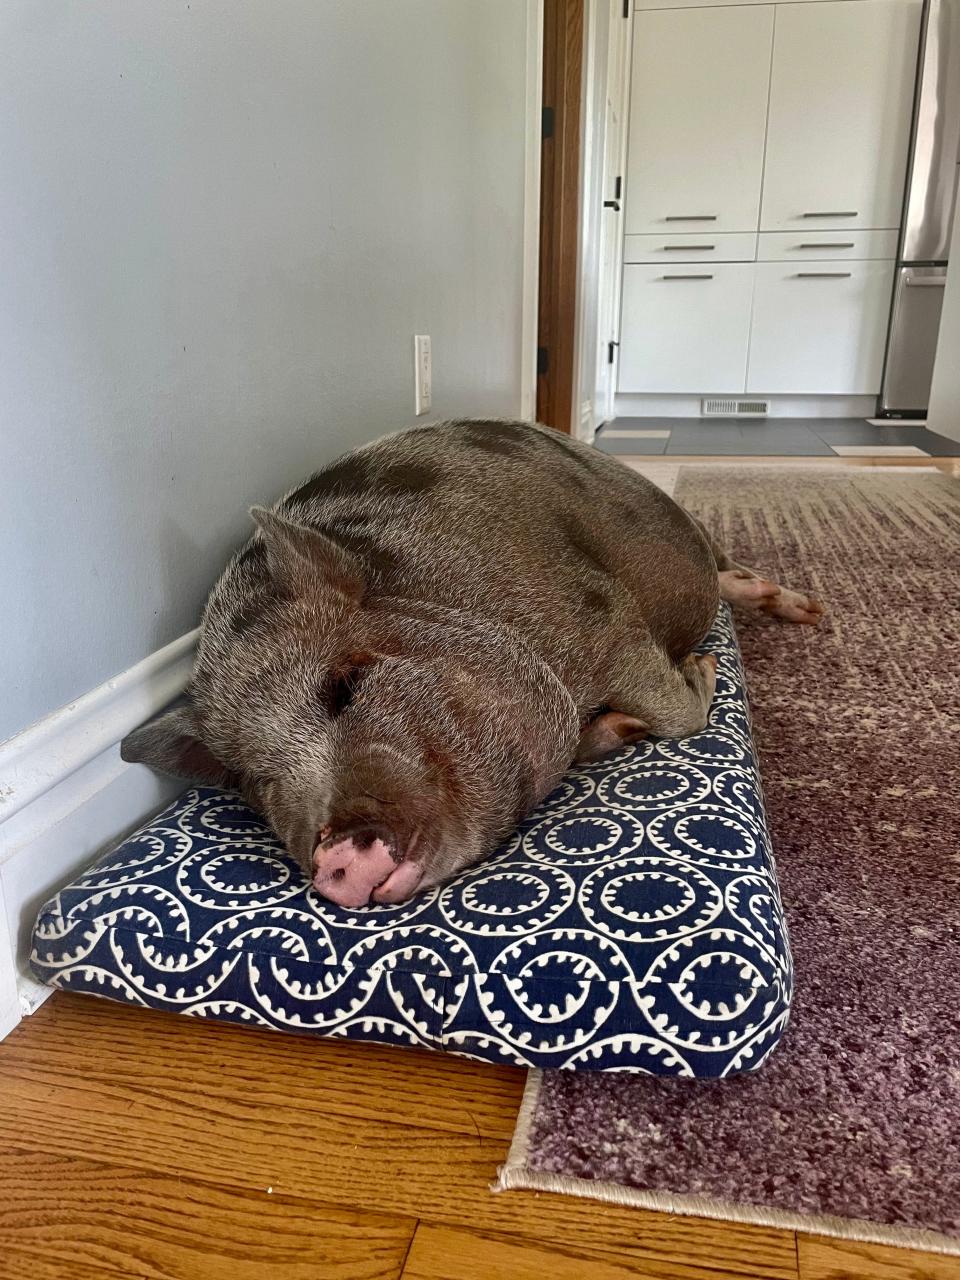 Rudi the pig sleeps in his home on the near-west side of Madison, Wisconsin.